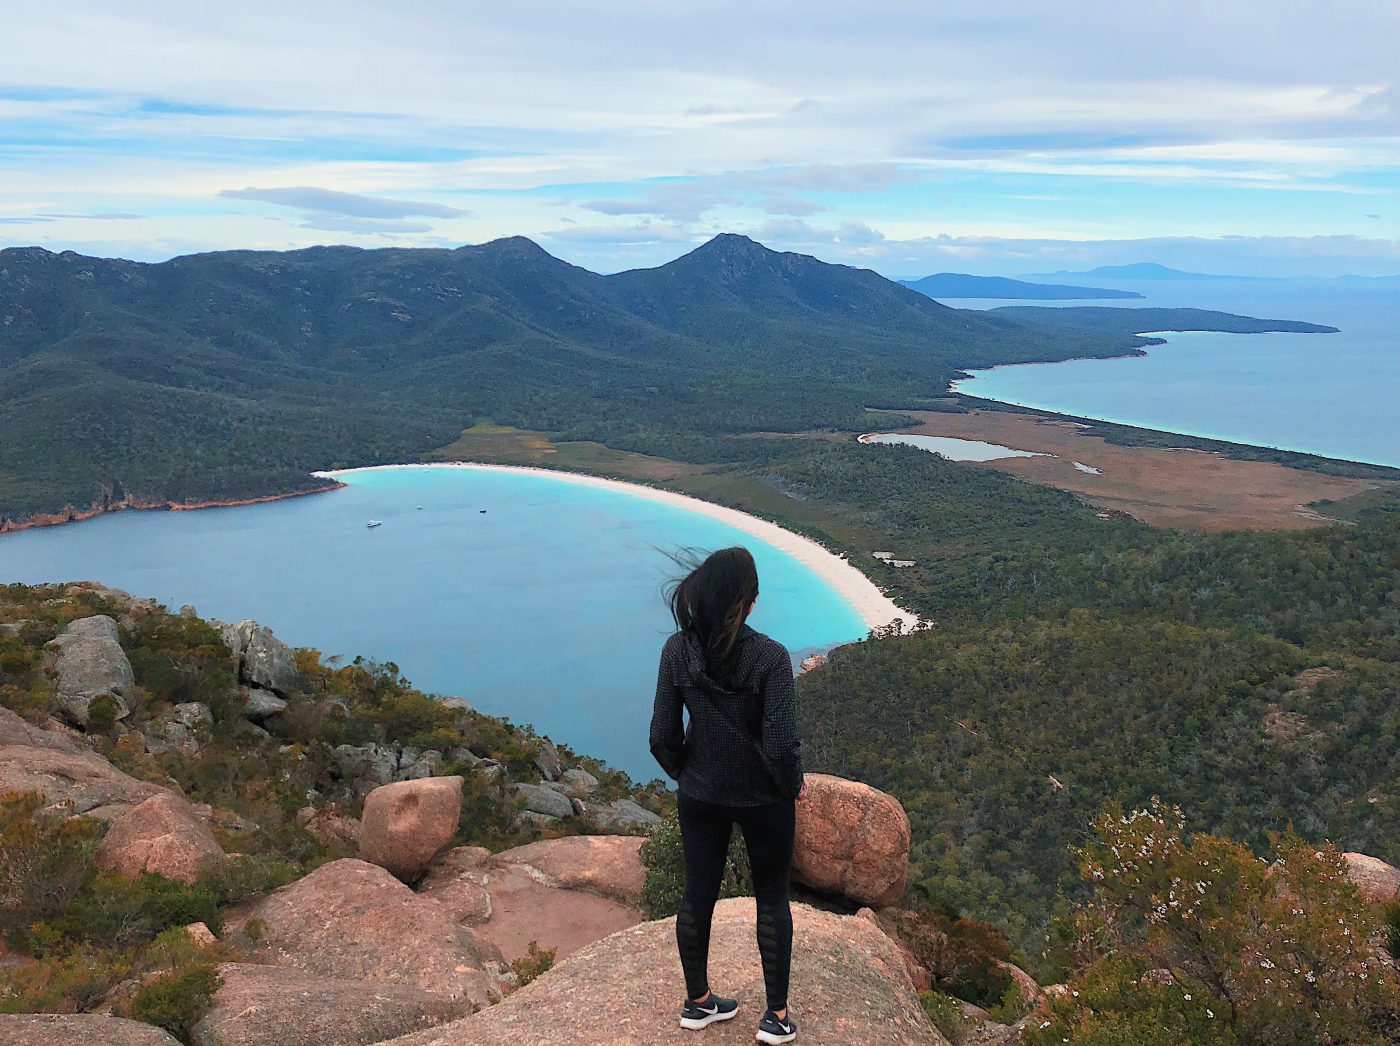 At the top of Mount Amos, Freycinet National Park